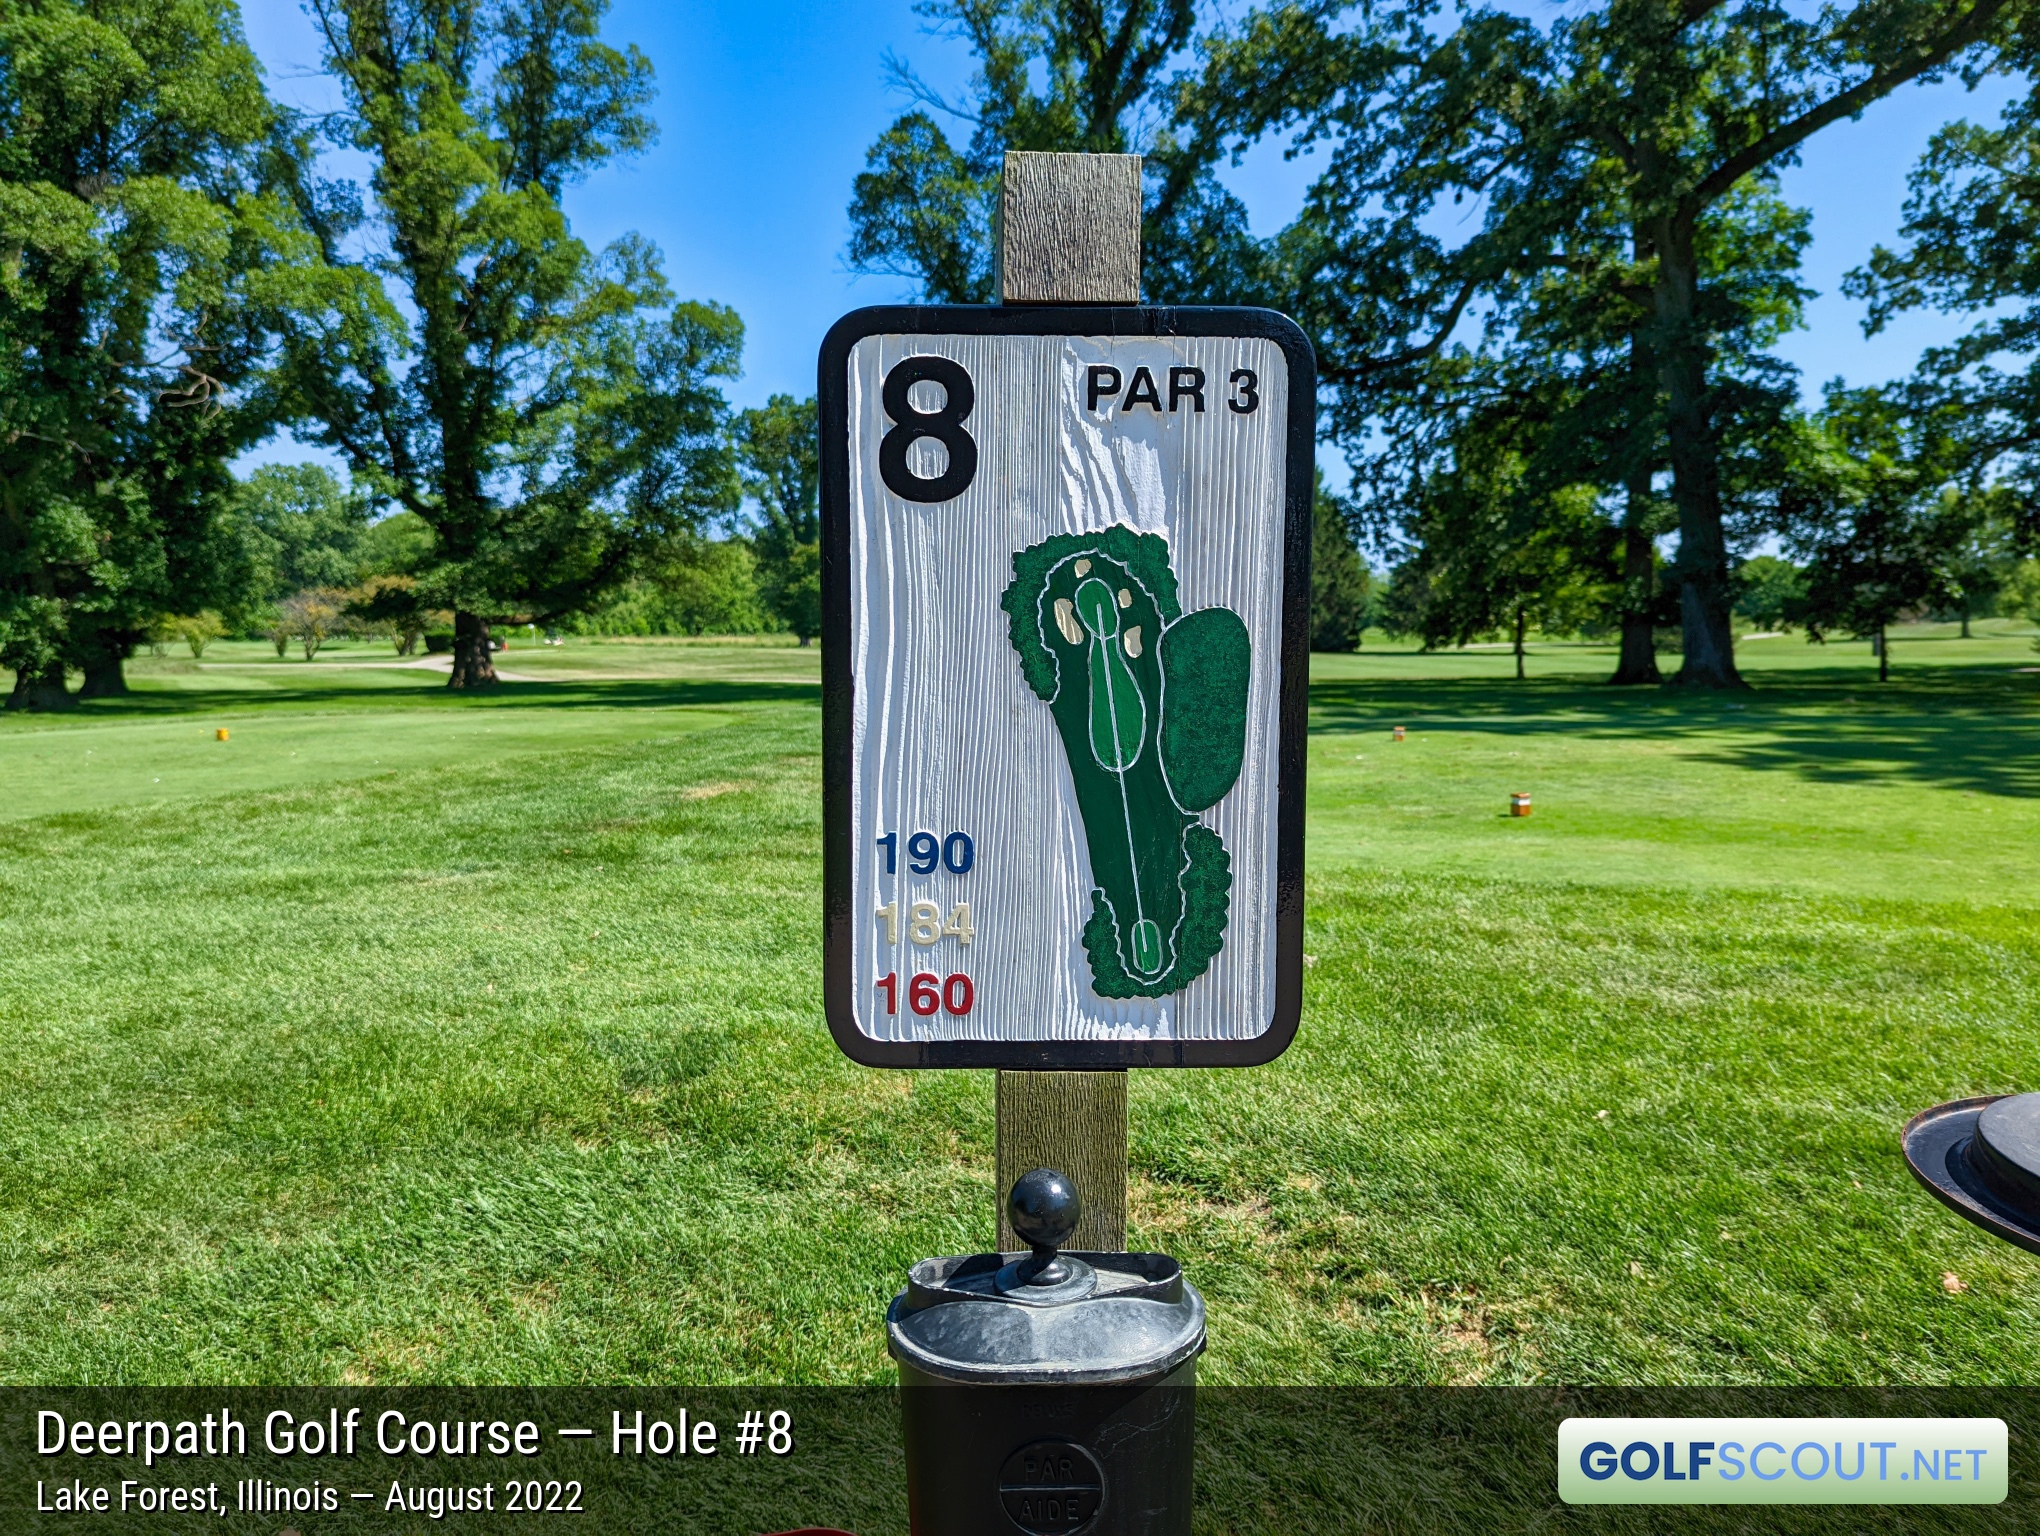 Photo of hole #8 at Deerpath Golf Course in Lake Forest, Illinois. 